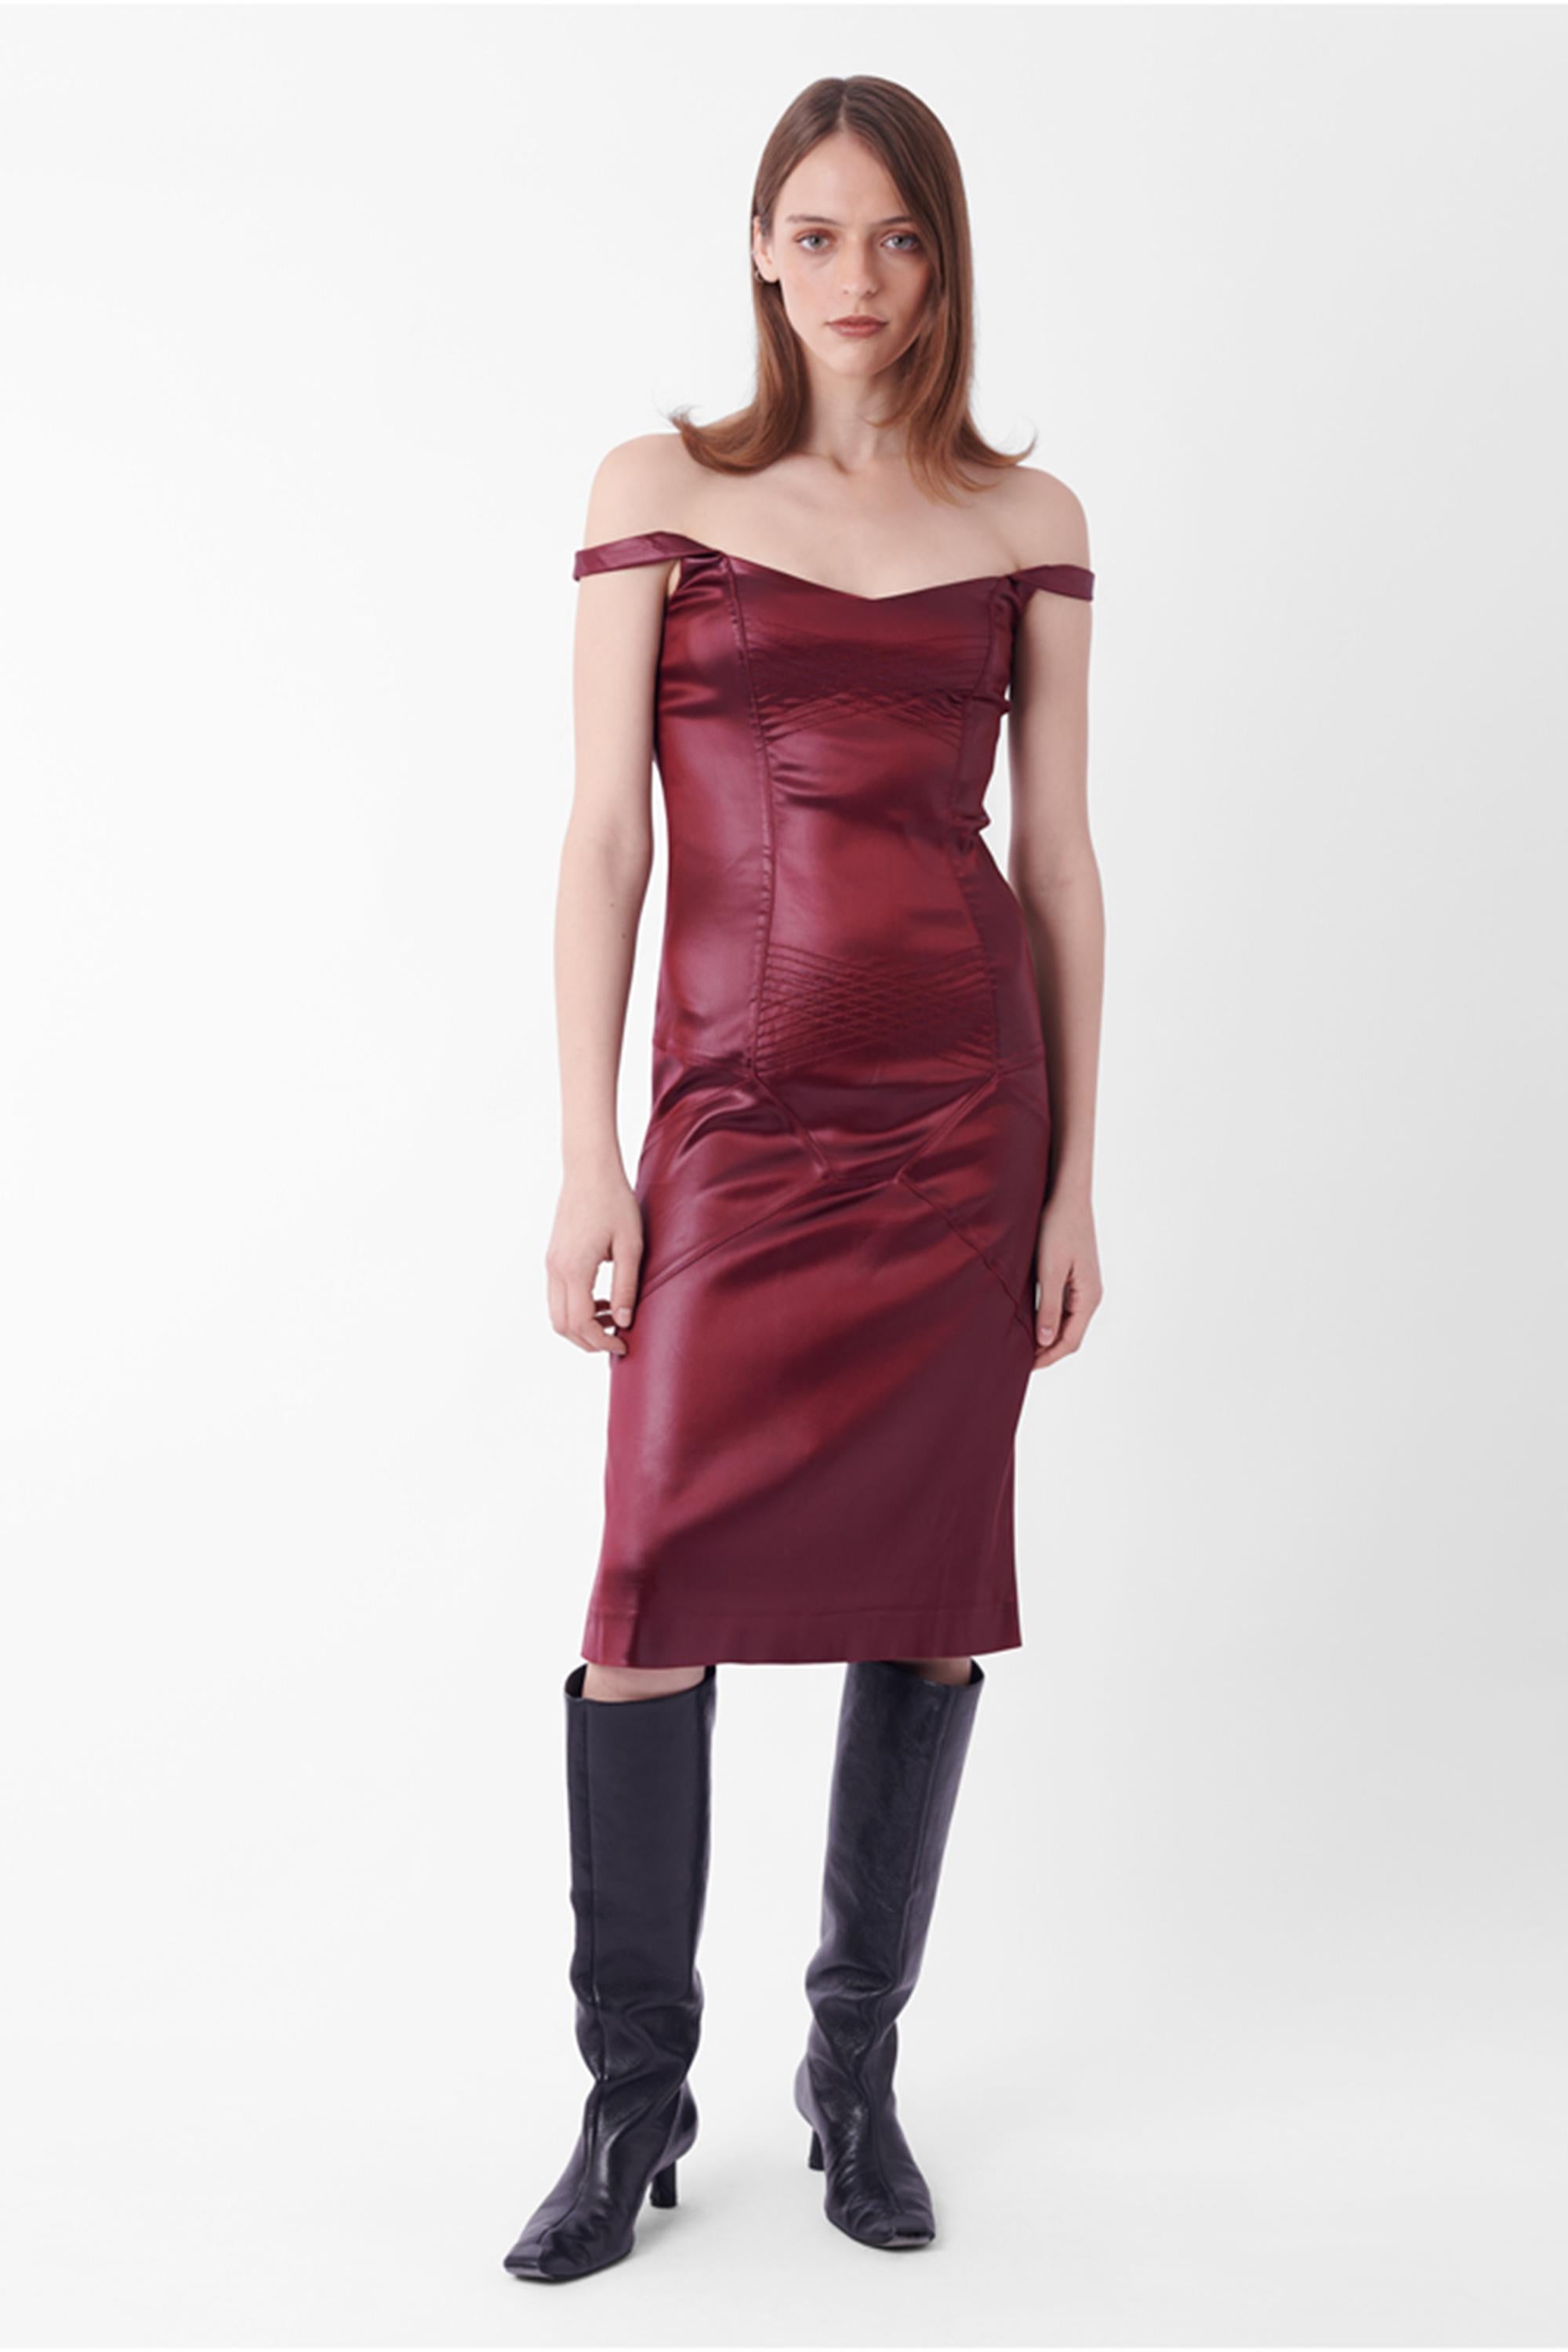 Vintage F/W 2000 Satin Burgundy Dress In Excellent Condition For Sale In London, GB